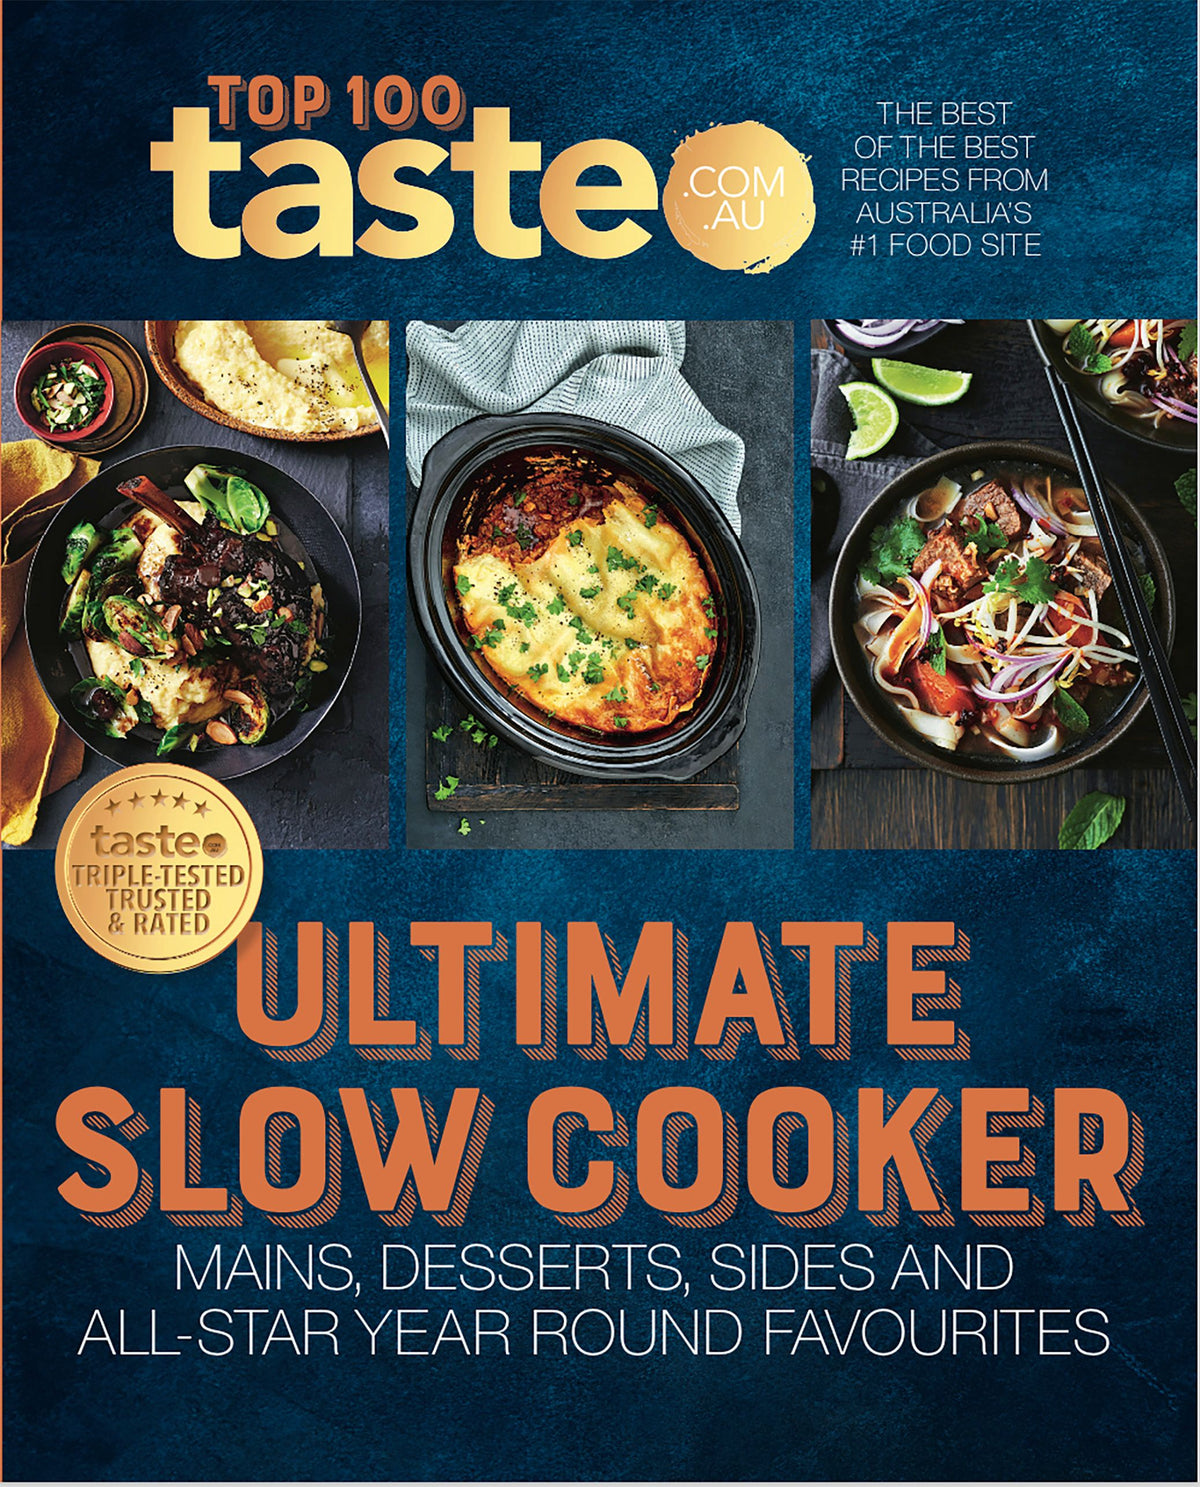 Ultimate Slow Cooker: The Best of the Best Recipes from Australia's #1 Food Site